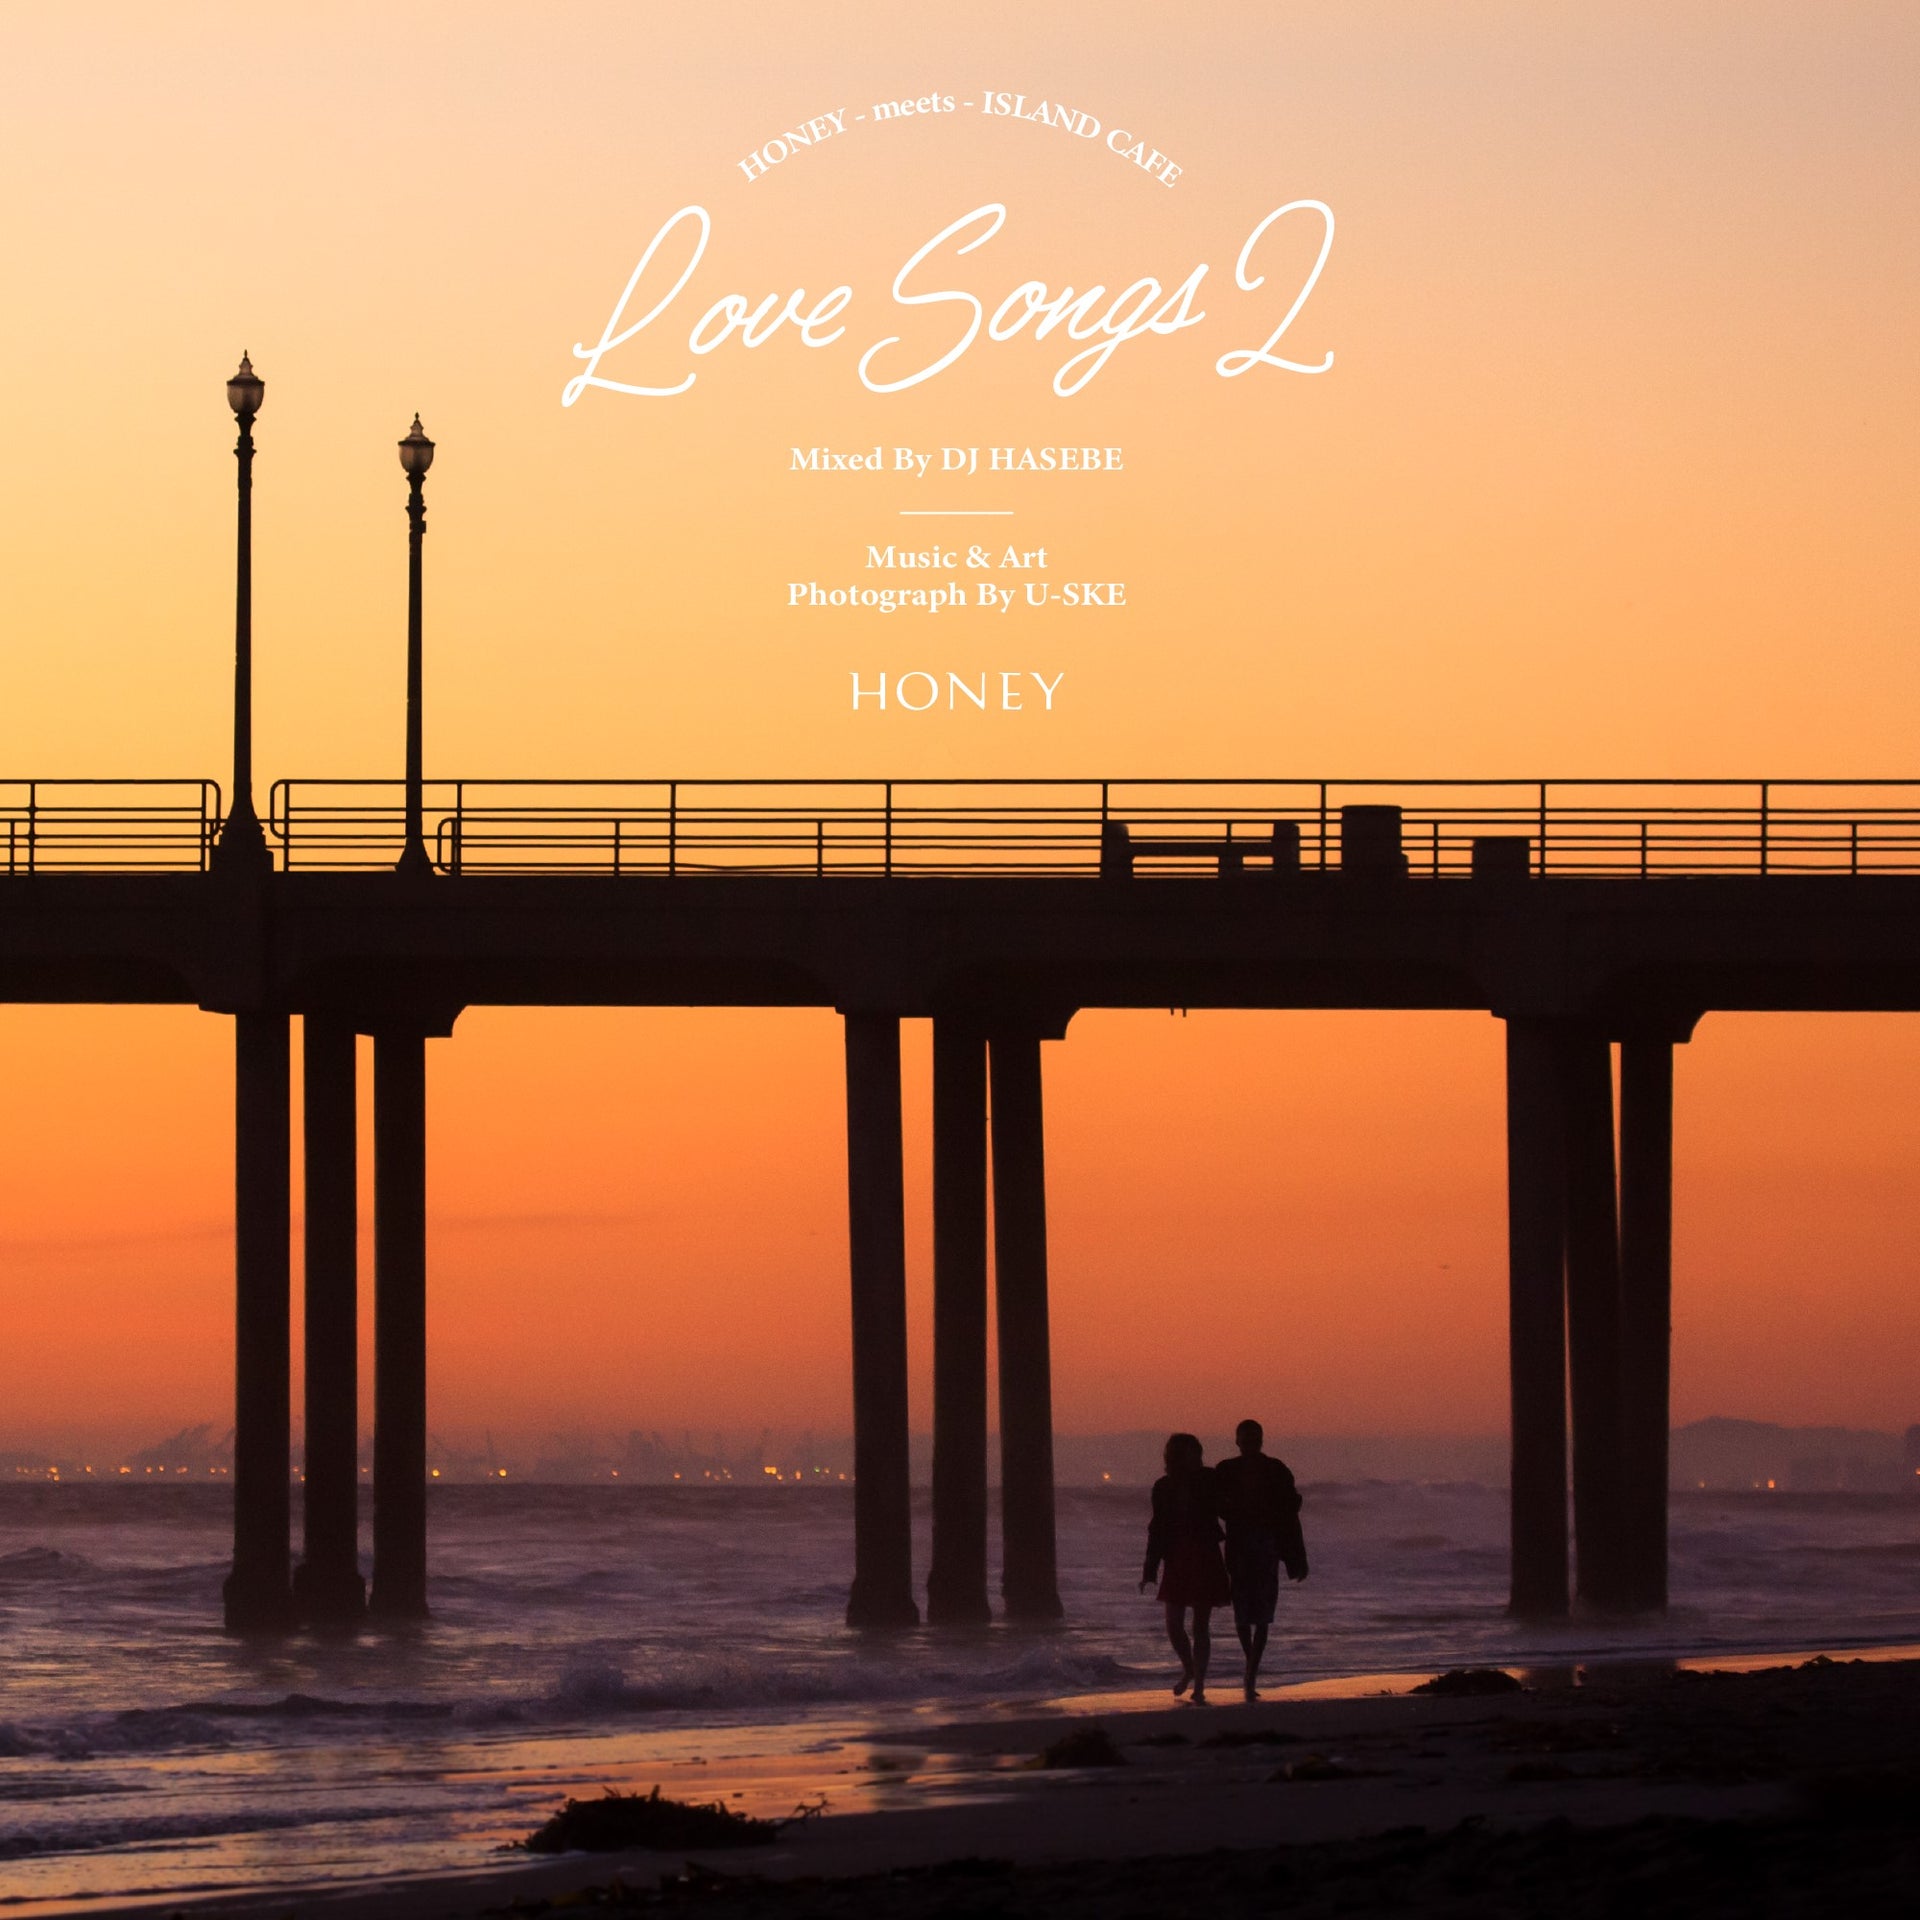 HONEY meets ISLAND CAFE – Love Songs 2 – mixed by DJ HASEBE